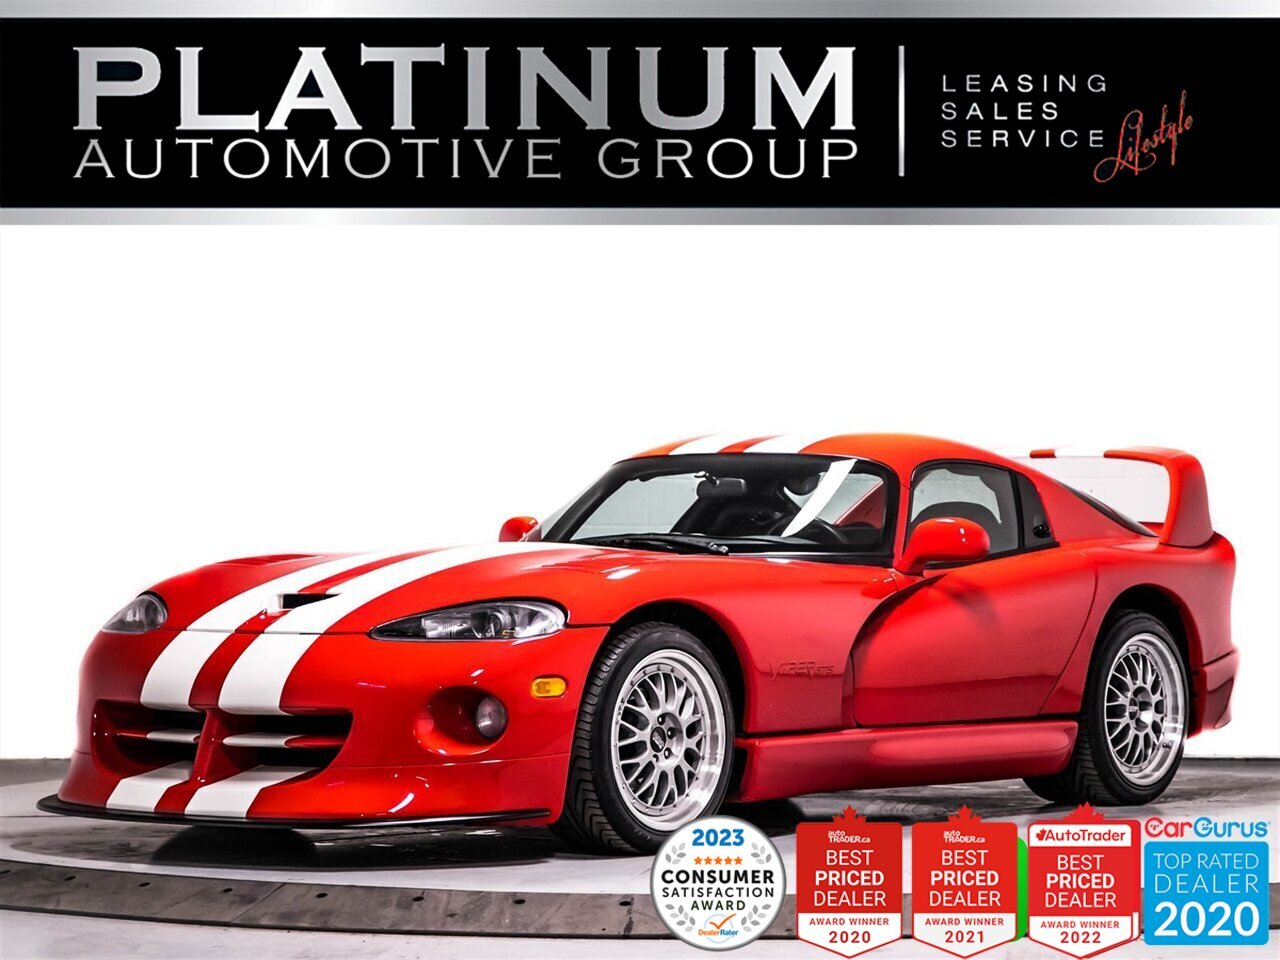 2002 Dodge Viper GTS, FINAL EDITION 014 of 360, V10, HENNESSEY